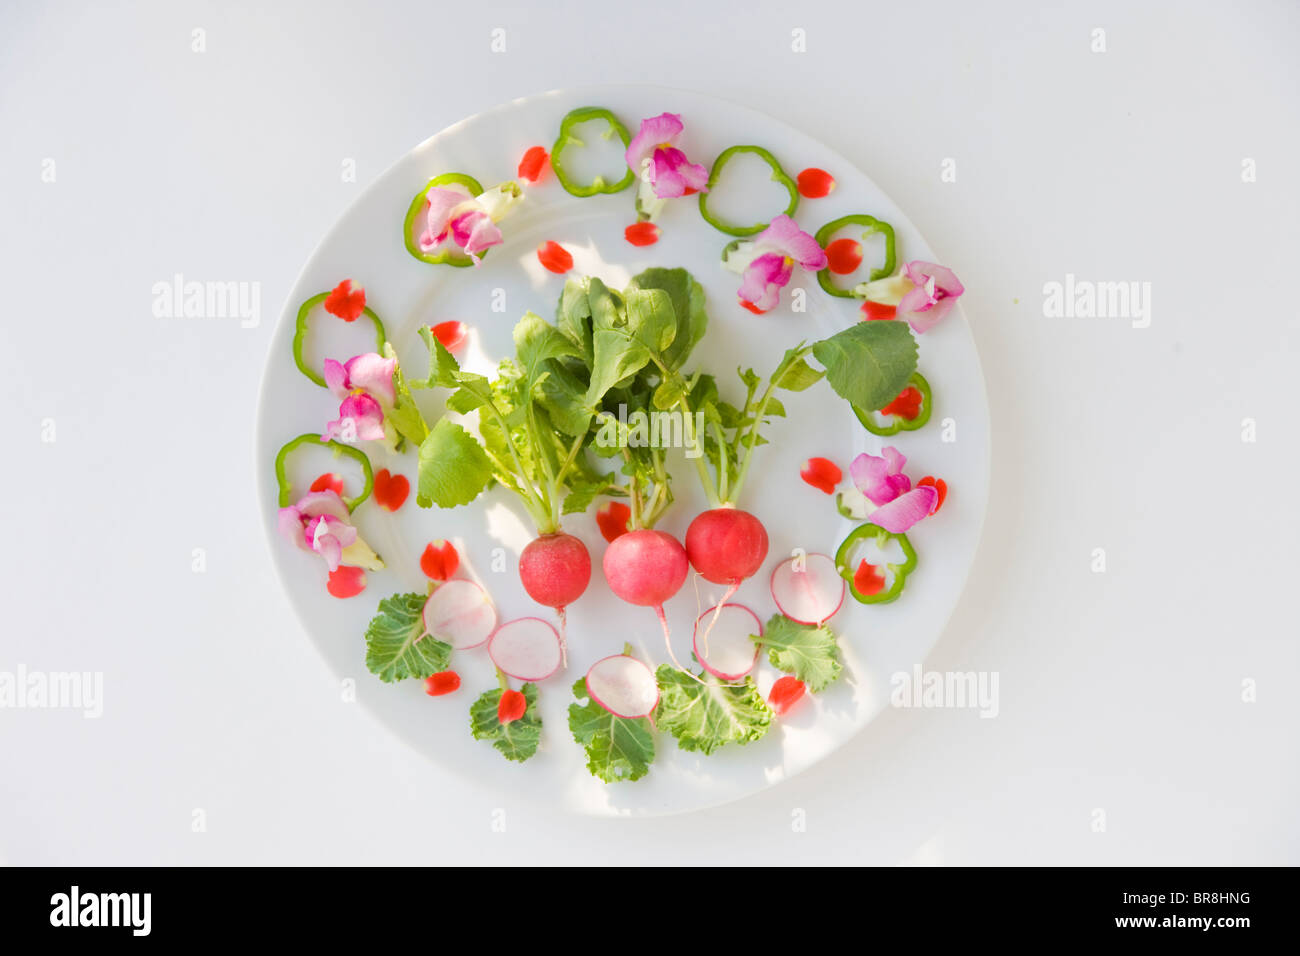 Salad with flowers, white background Stock Photo